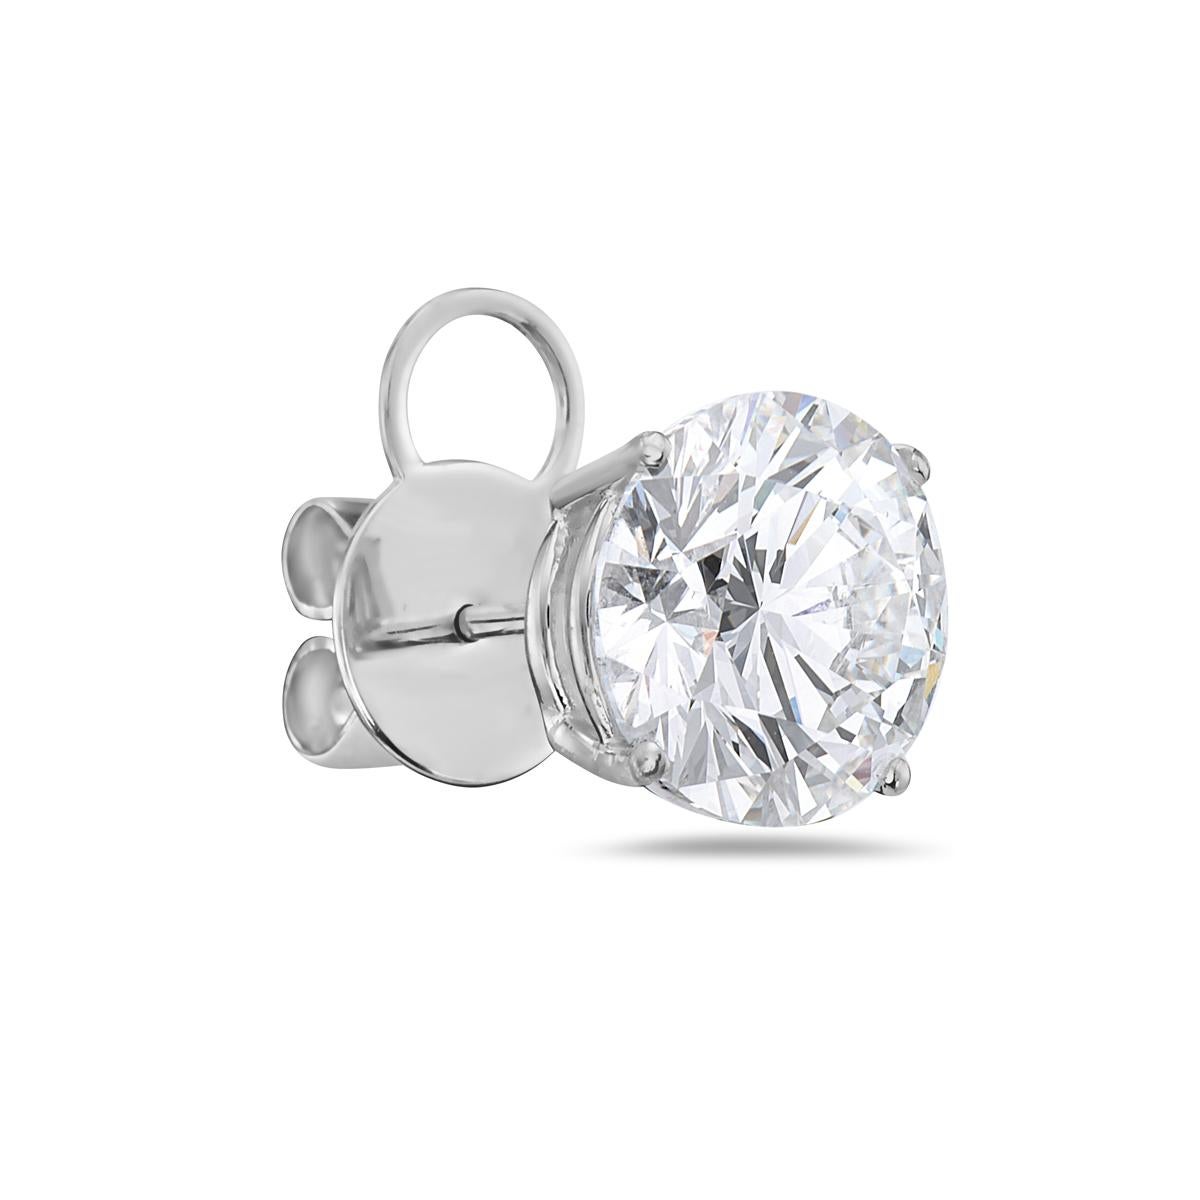 These diamond stud earrings feature two G VS1 diamonds weighing 4.03 and 4.08 carats each, xxx no fluorescence. Mounted in 18K white gold 4 prong setting. GIA certified. Report No. 5171427180/5172546076.

Viewings available in our NYC showroom by